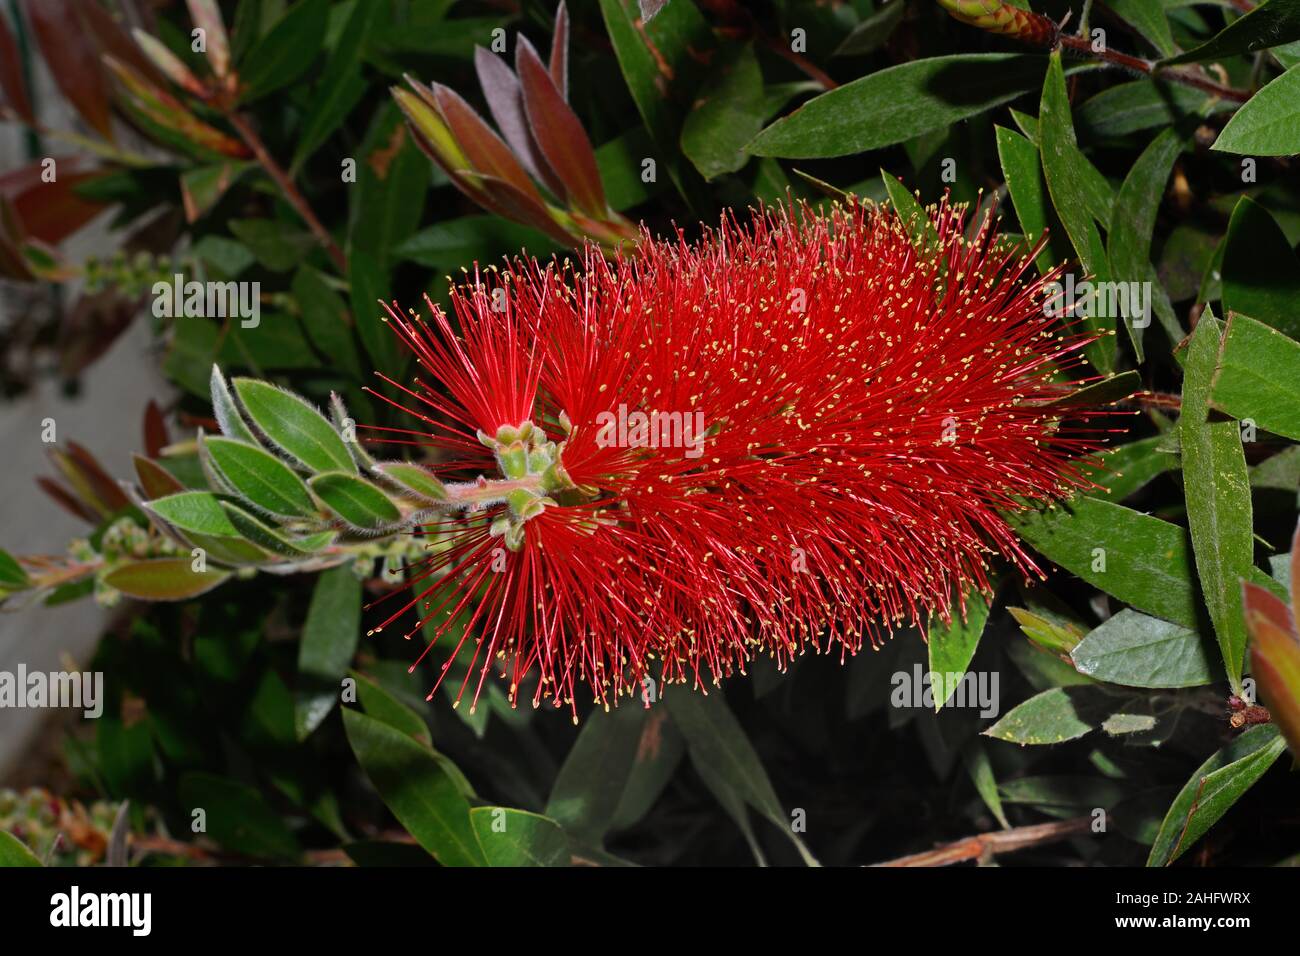 Callistemon citrinus (common red bottlebrush) is endemic to New South Wales and Victoria in Australia growing in swamps and along creeks. Stock Photo